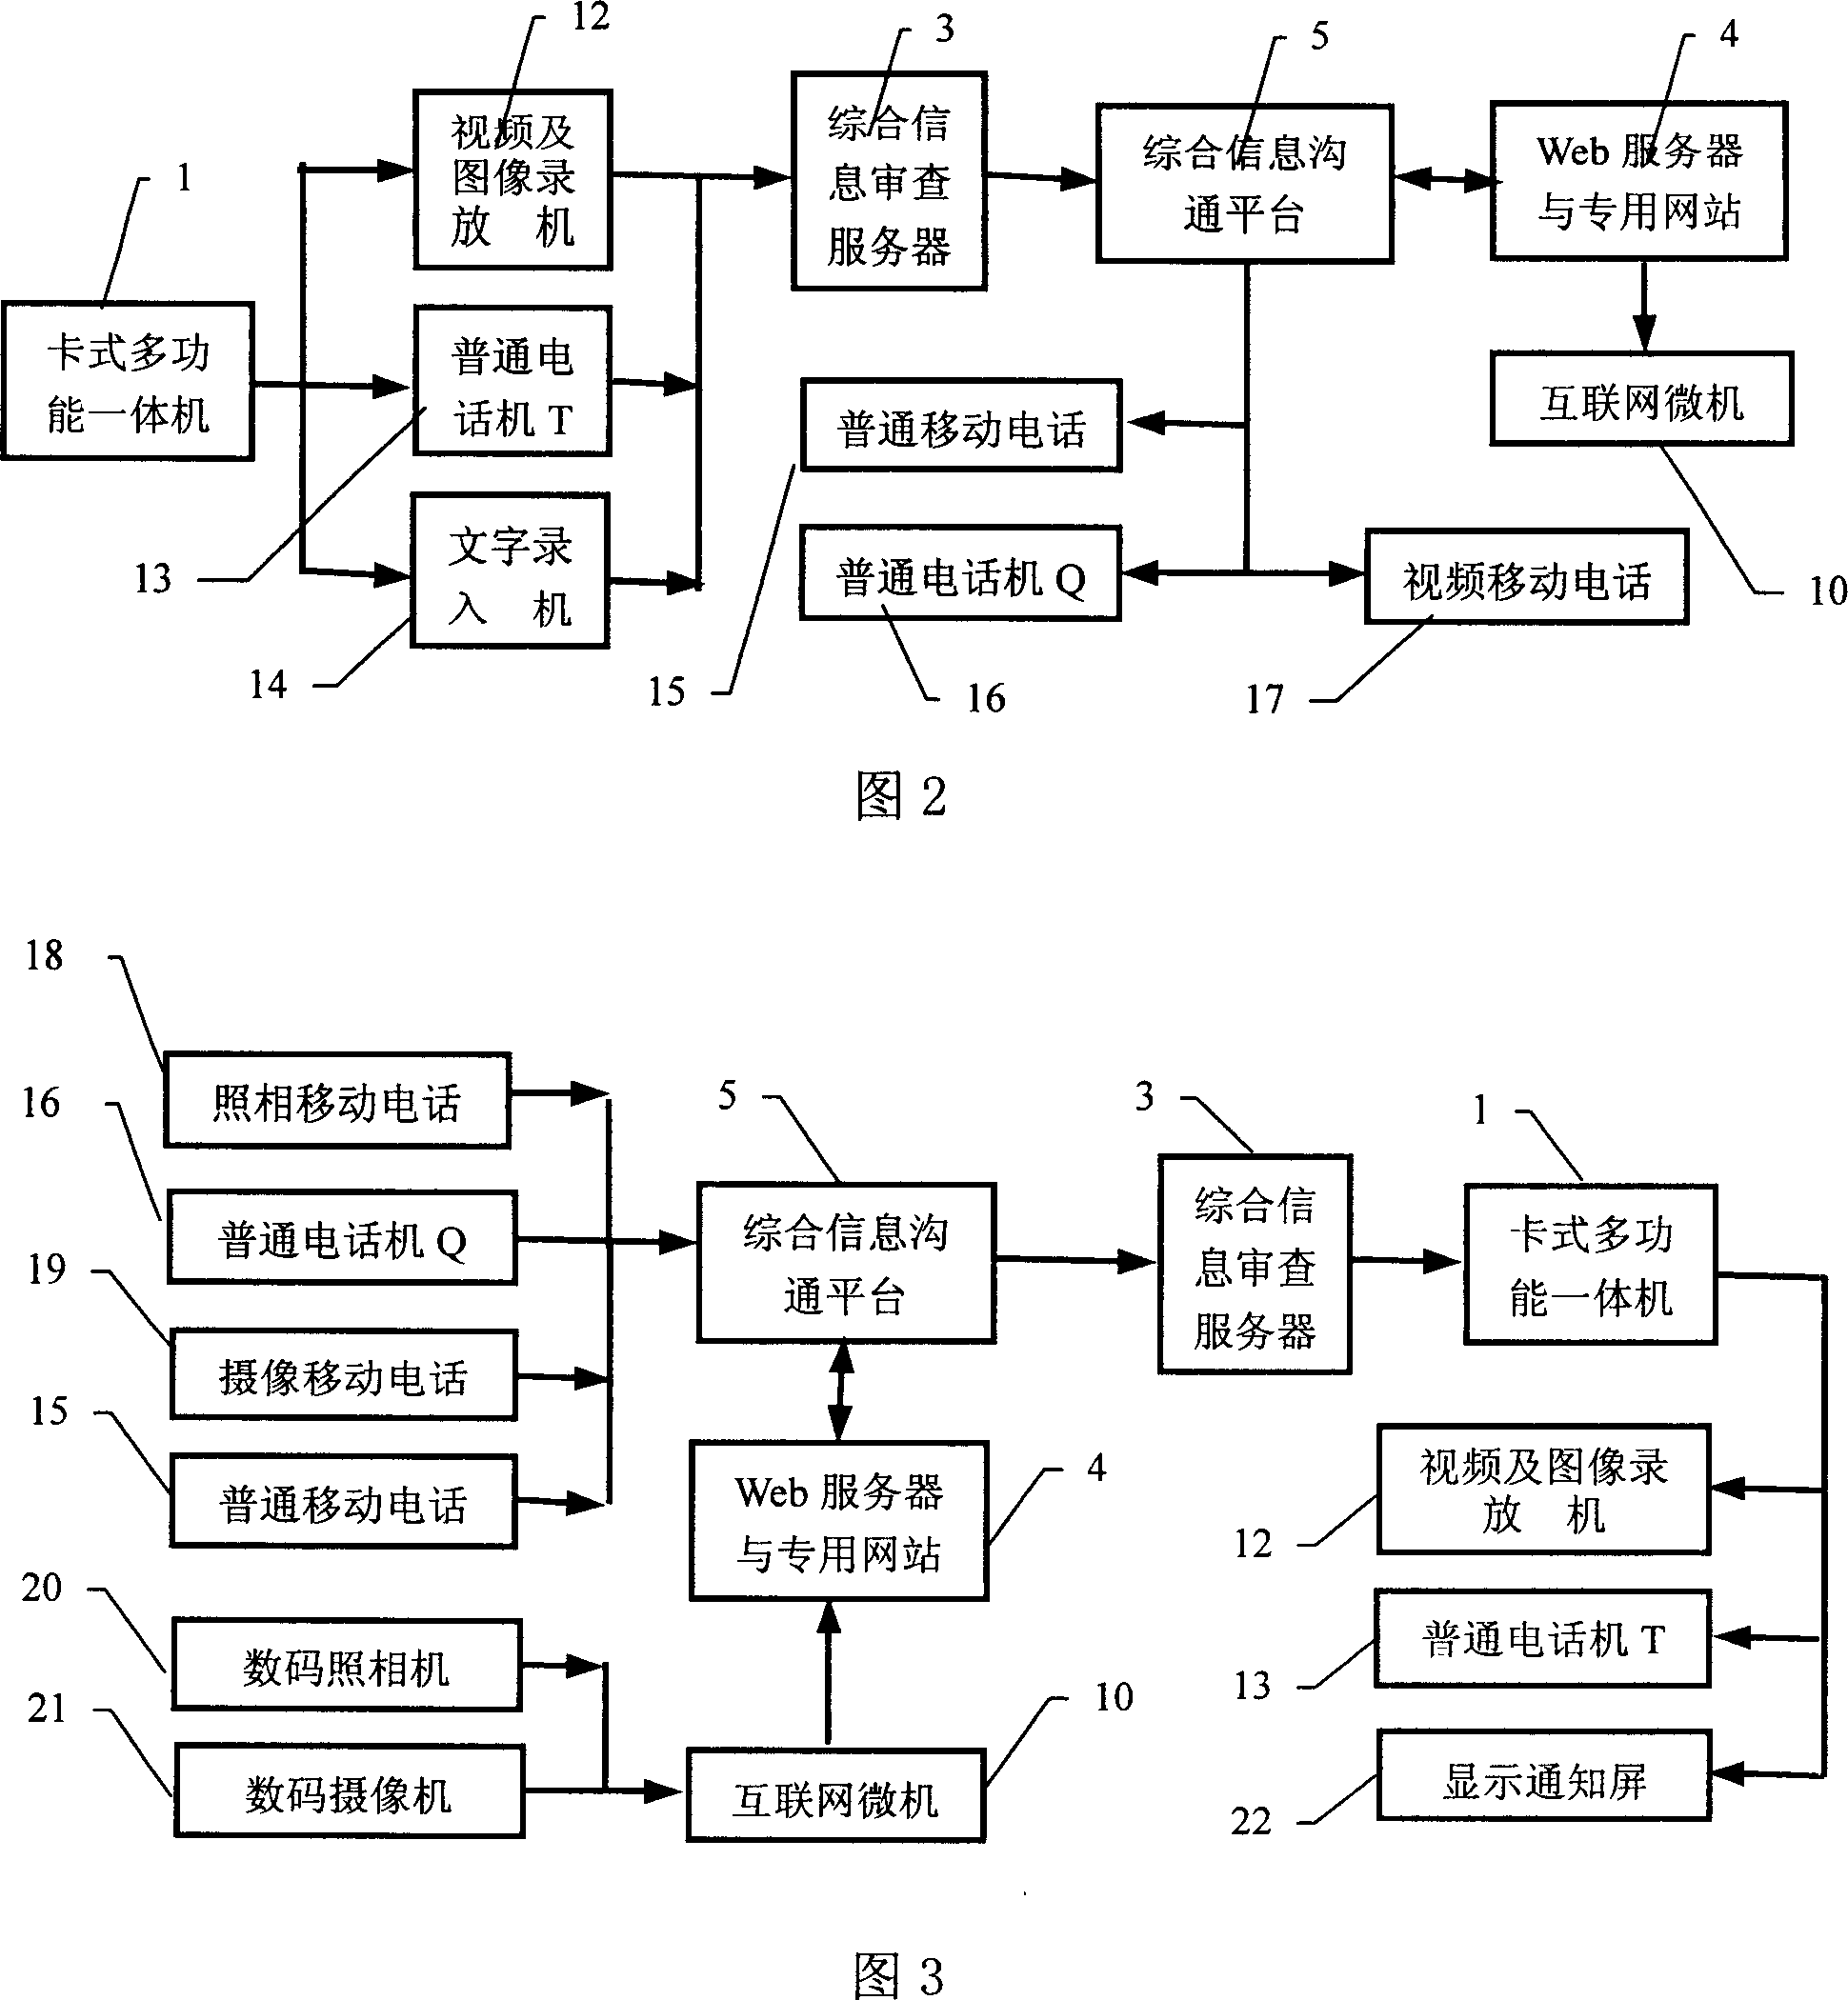 Multimedia comprehensive information transceiving and examining method for special group